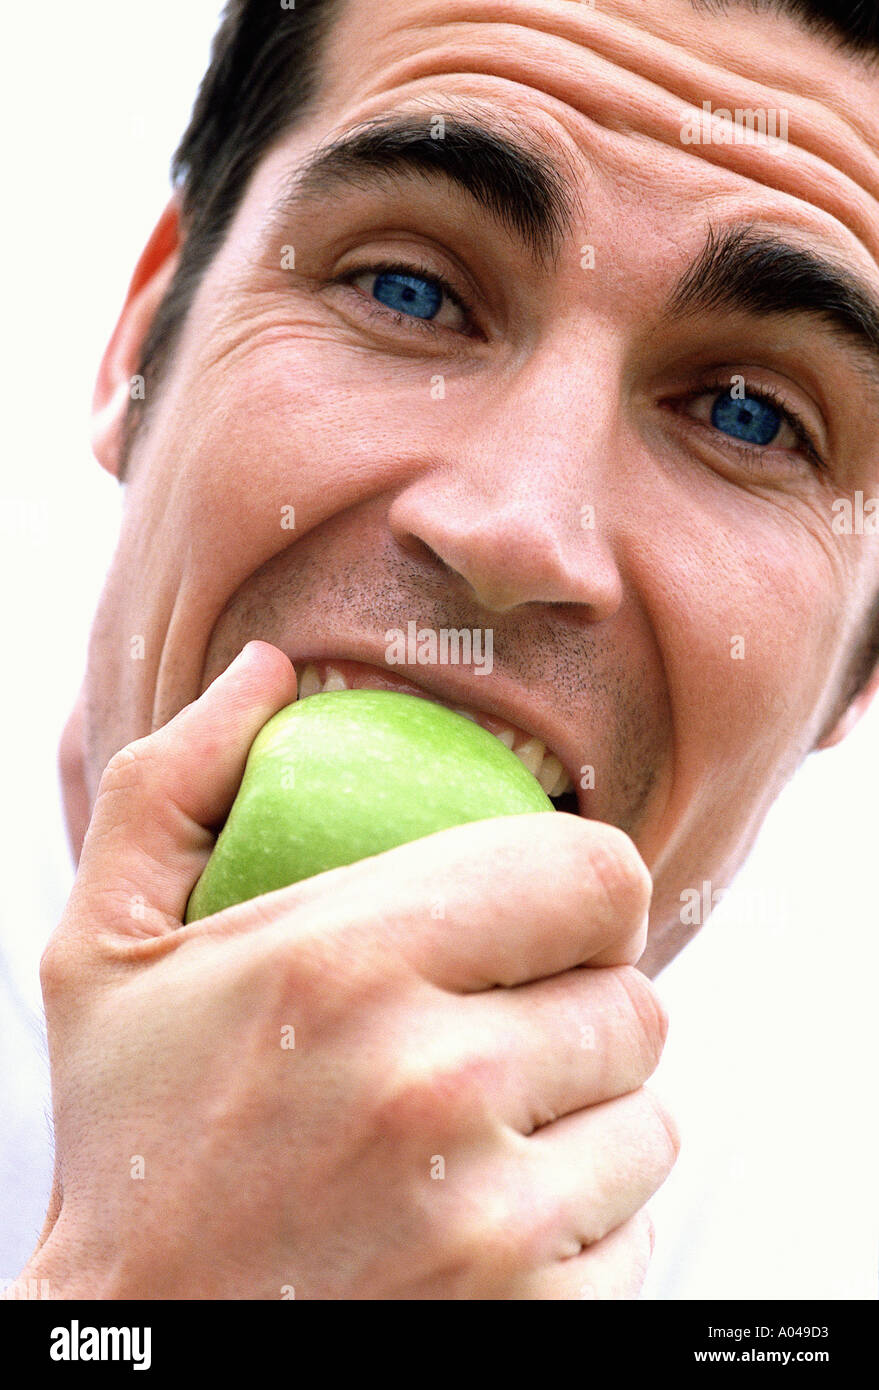 Close up portrait of a young man eating an apple Banque D'Images